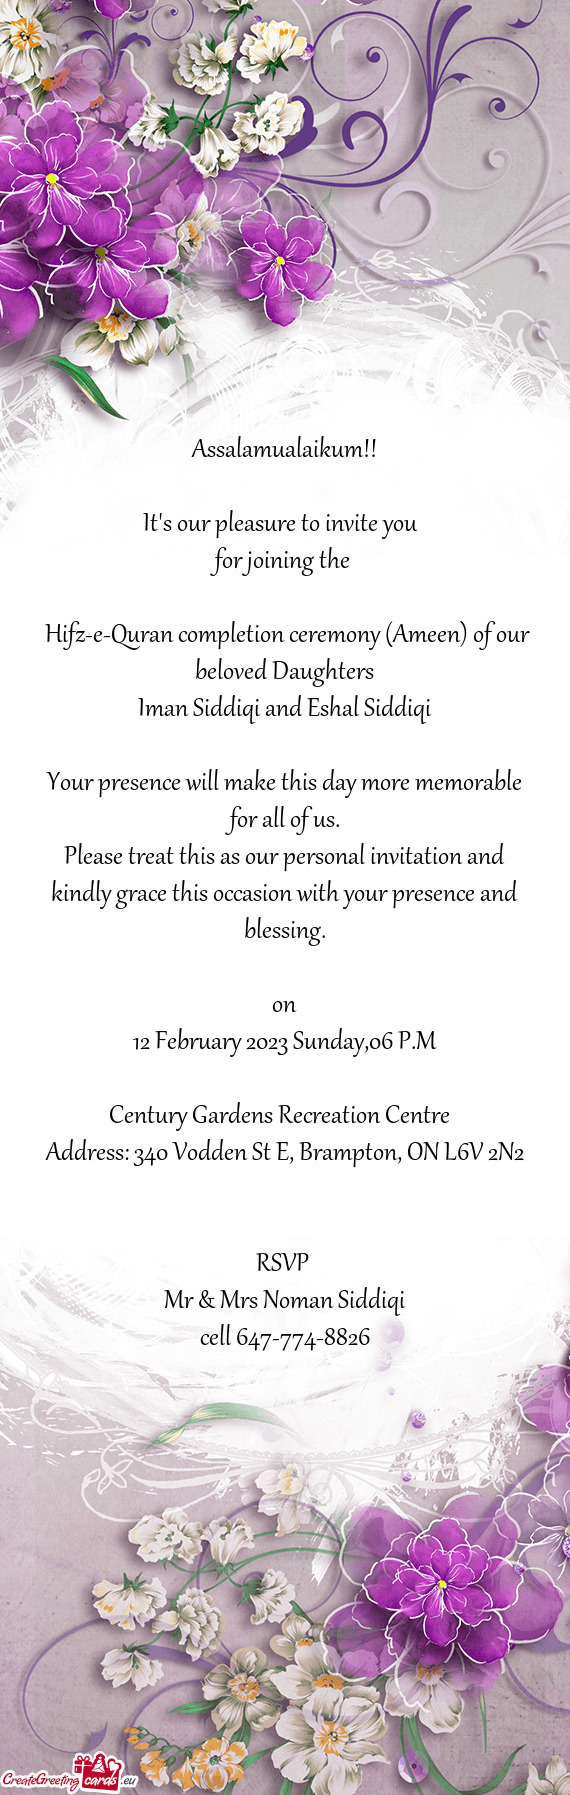 Hifz-e-Quran completion ceremony (Ameen) of our beloved Daughters